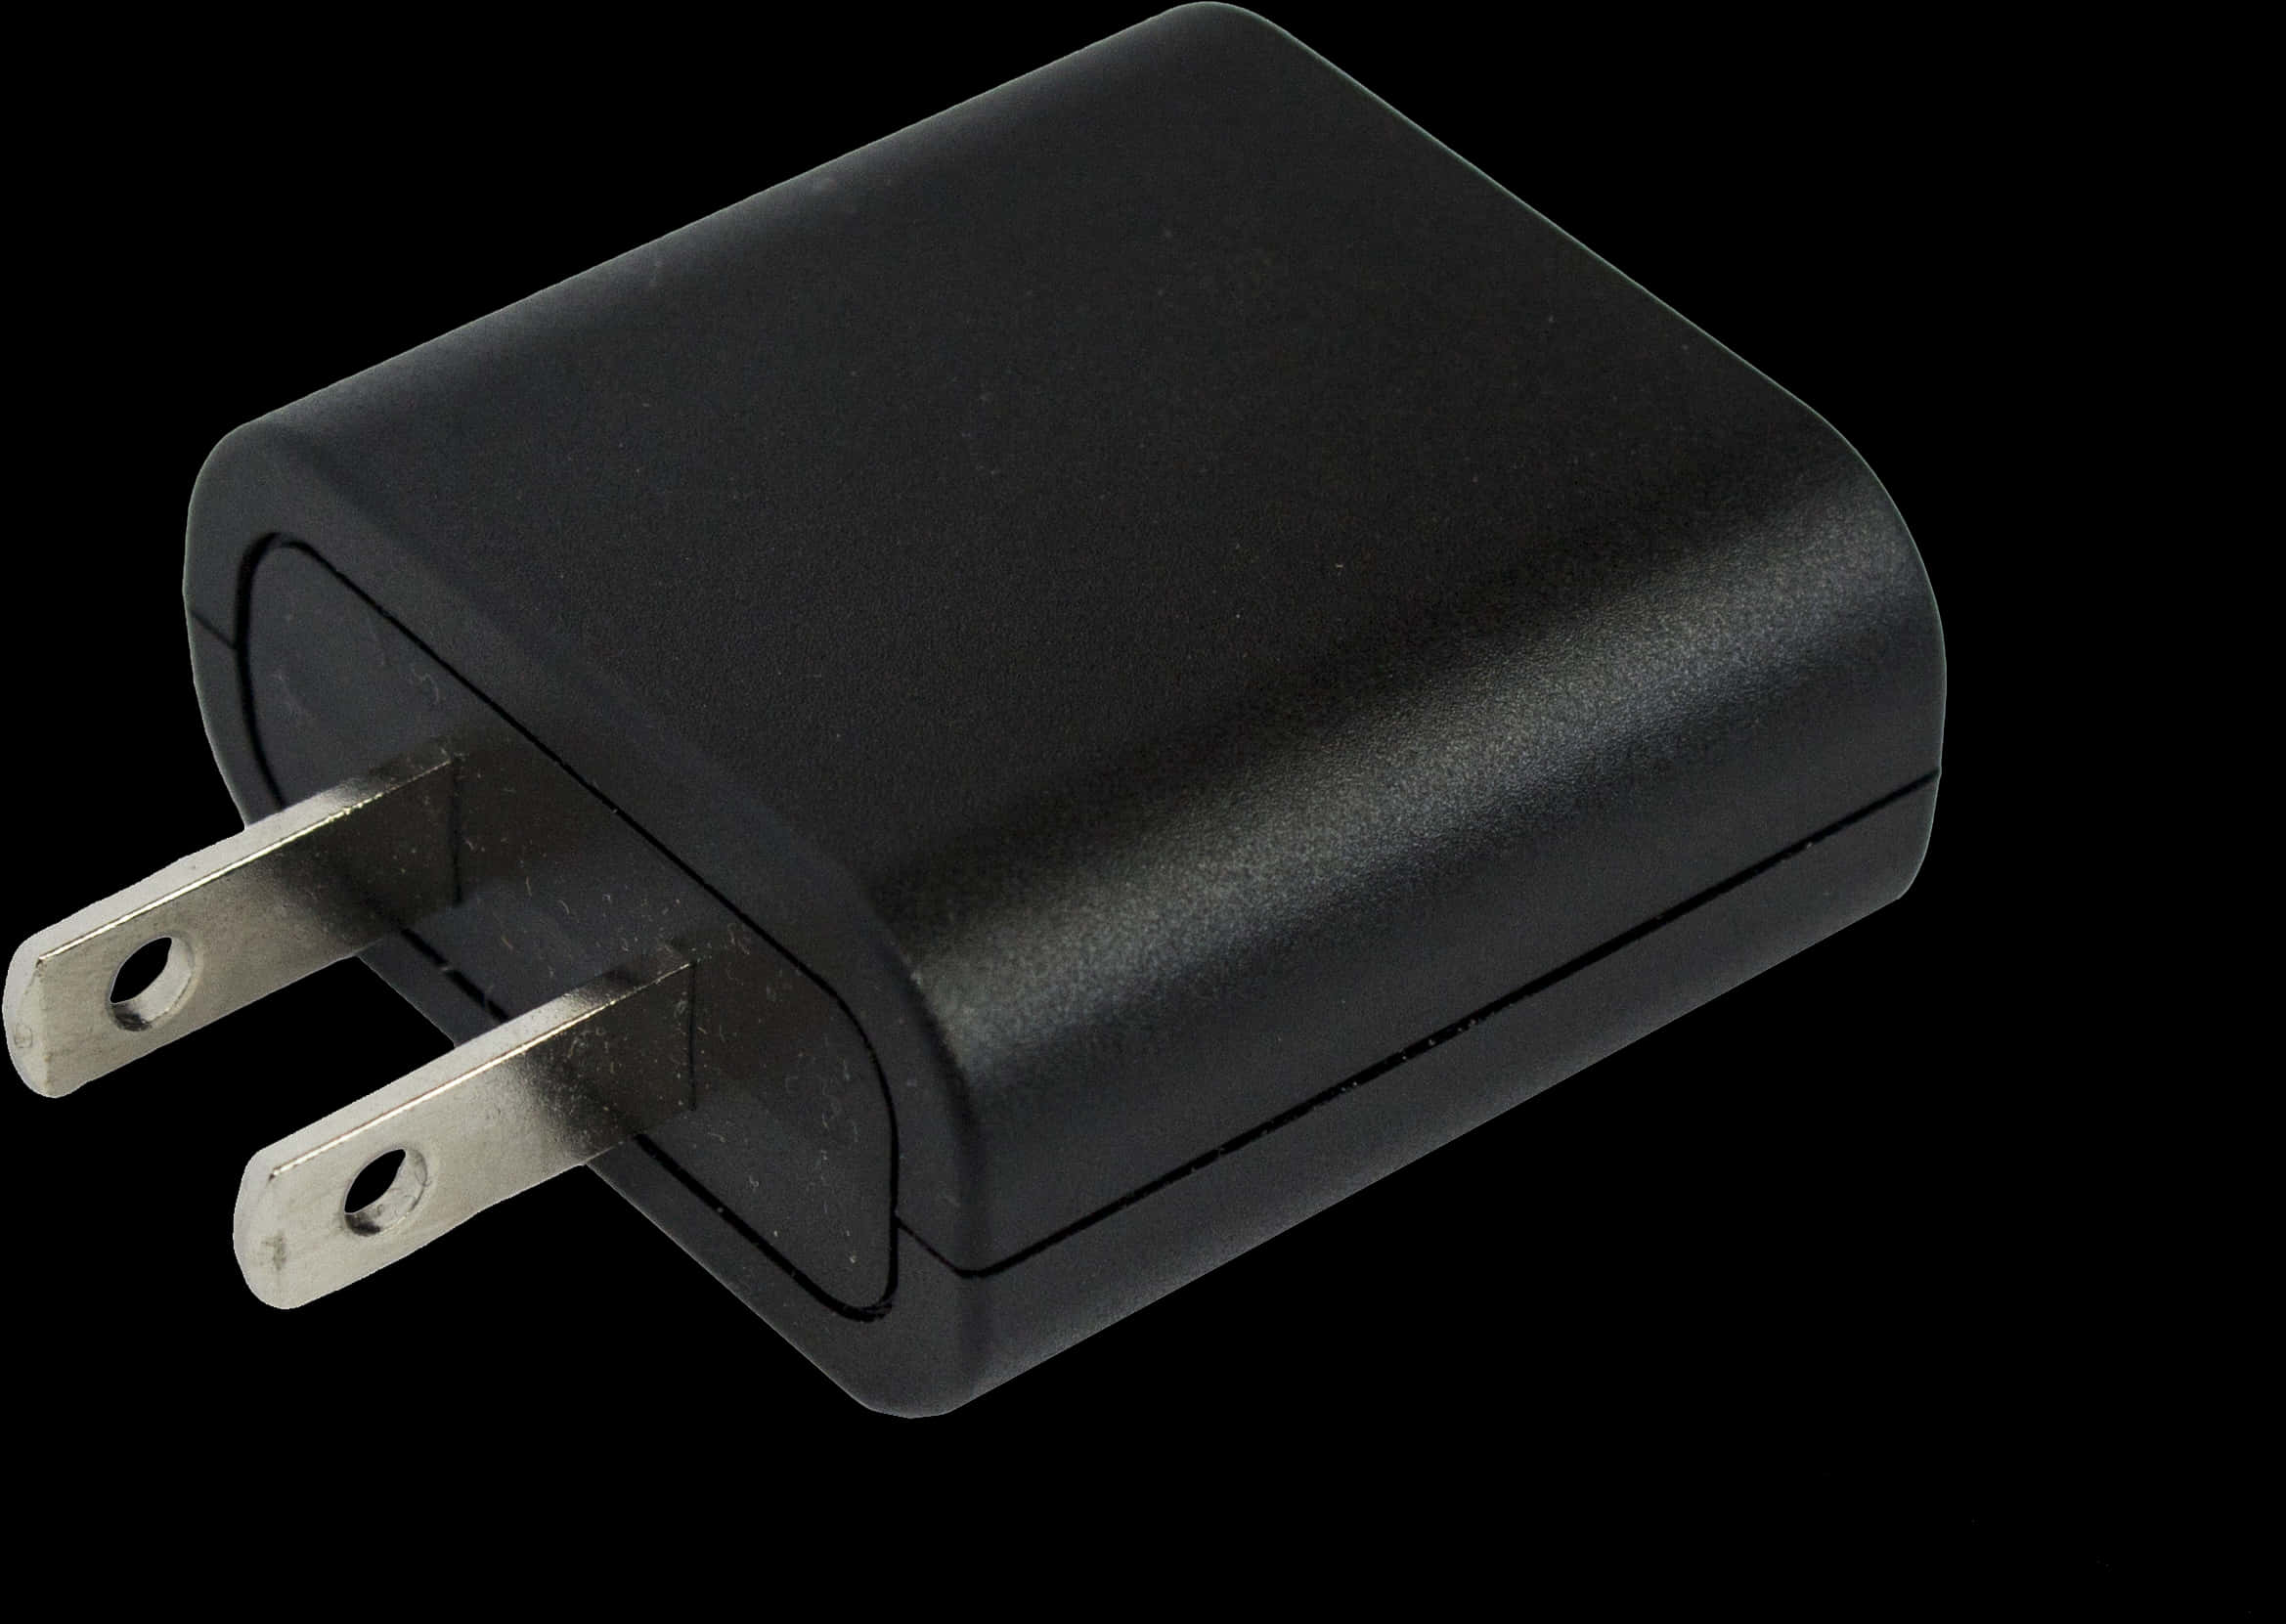 Black_ U S B_ Wall_ Charger_ Adapter PNG